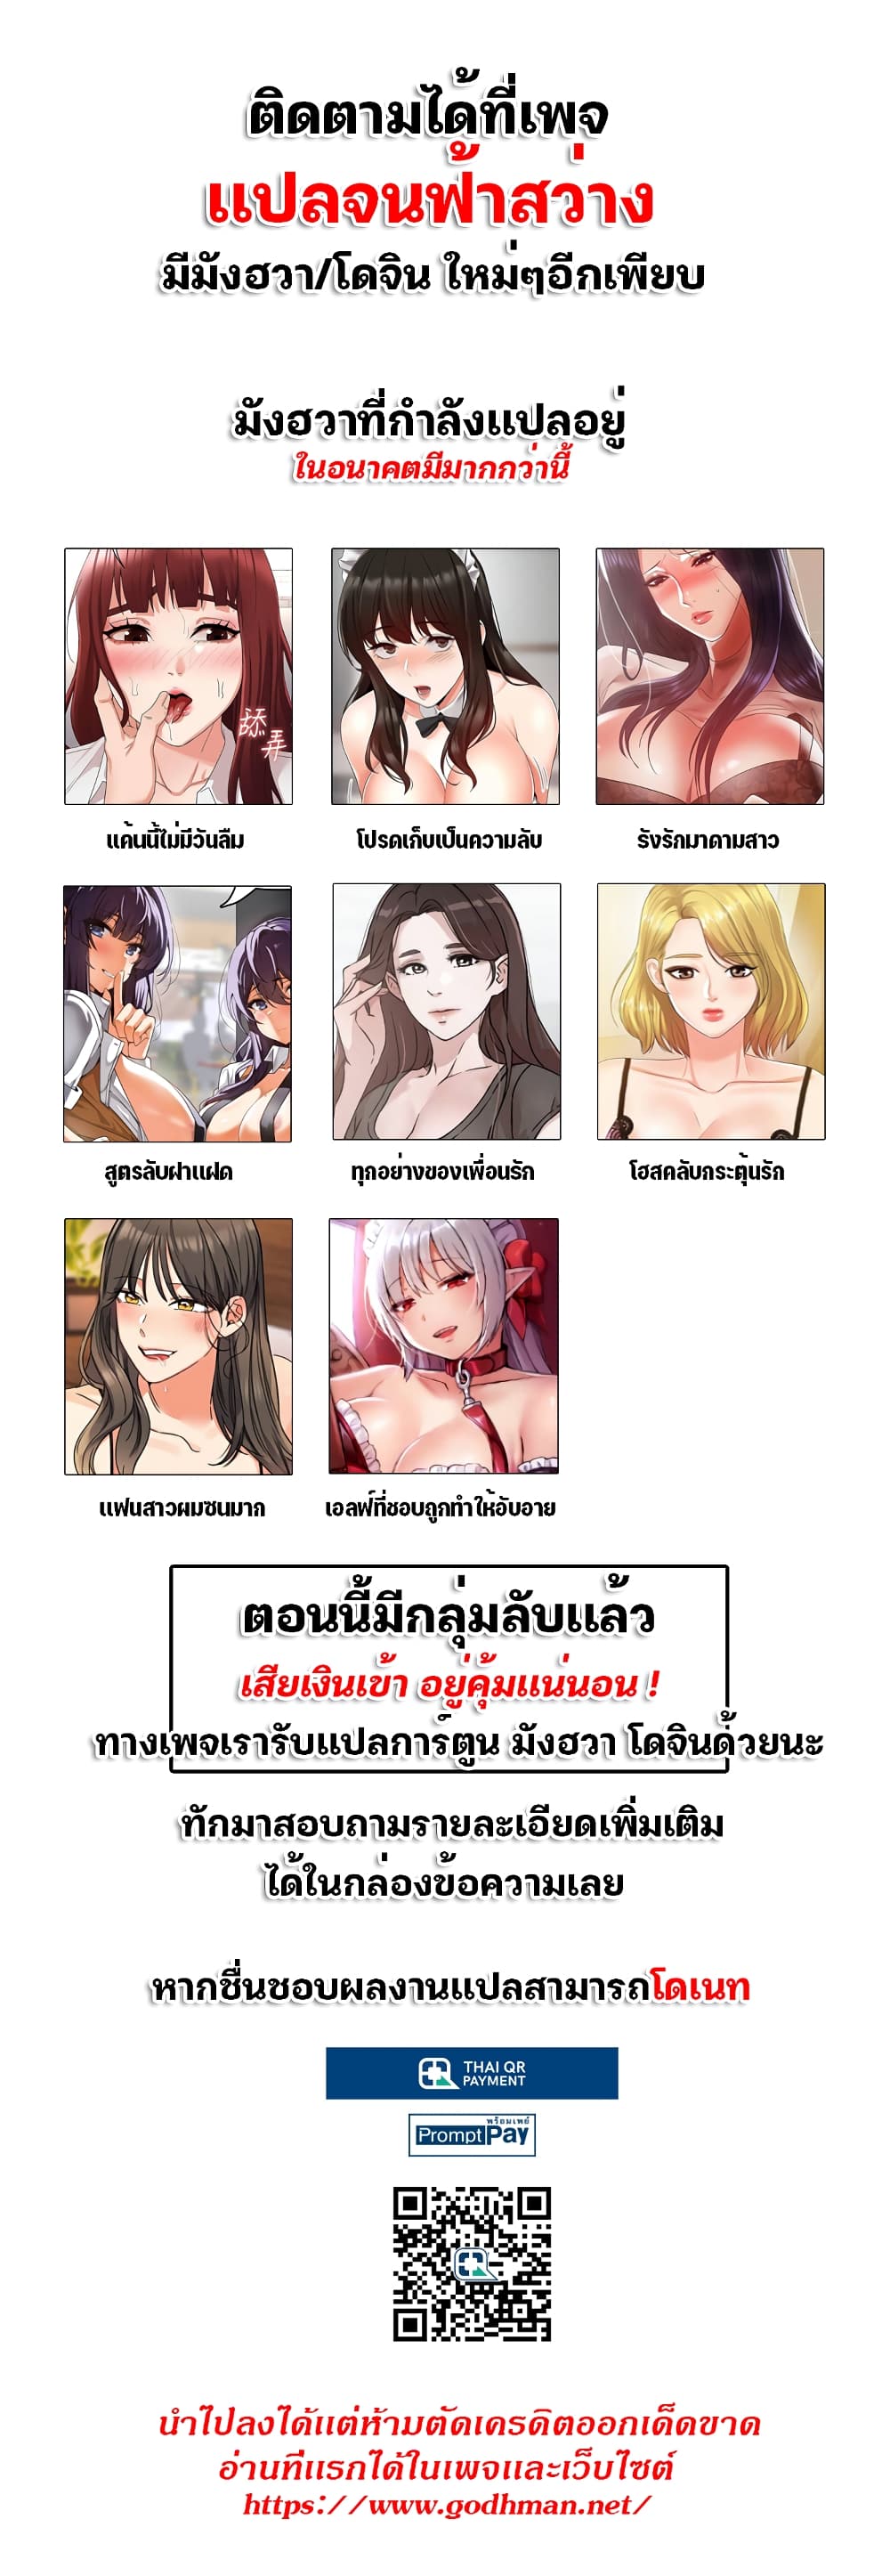 Everything About Best Friend 68-2 ภาพที่ 1